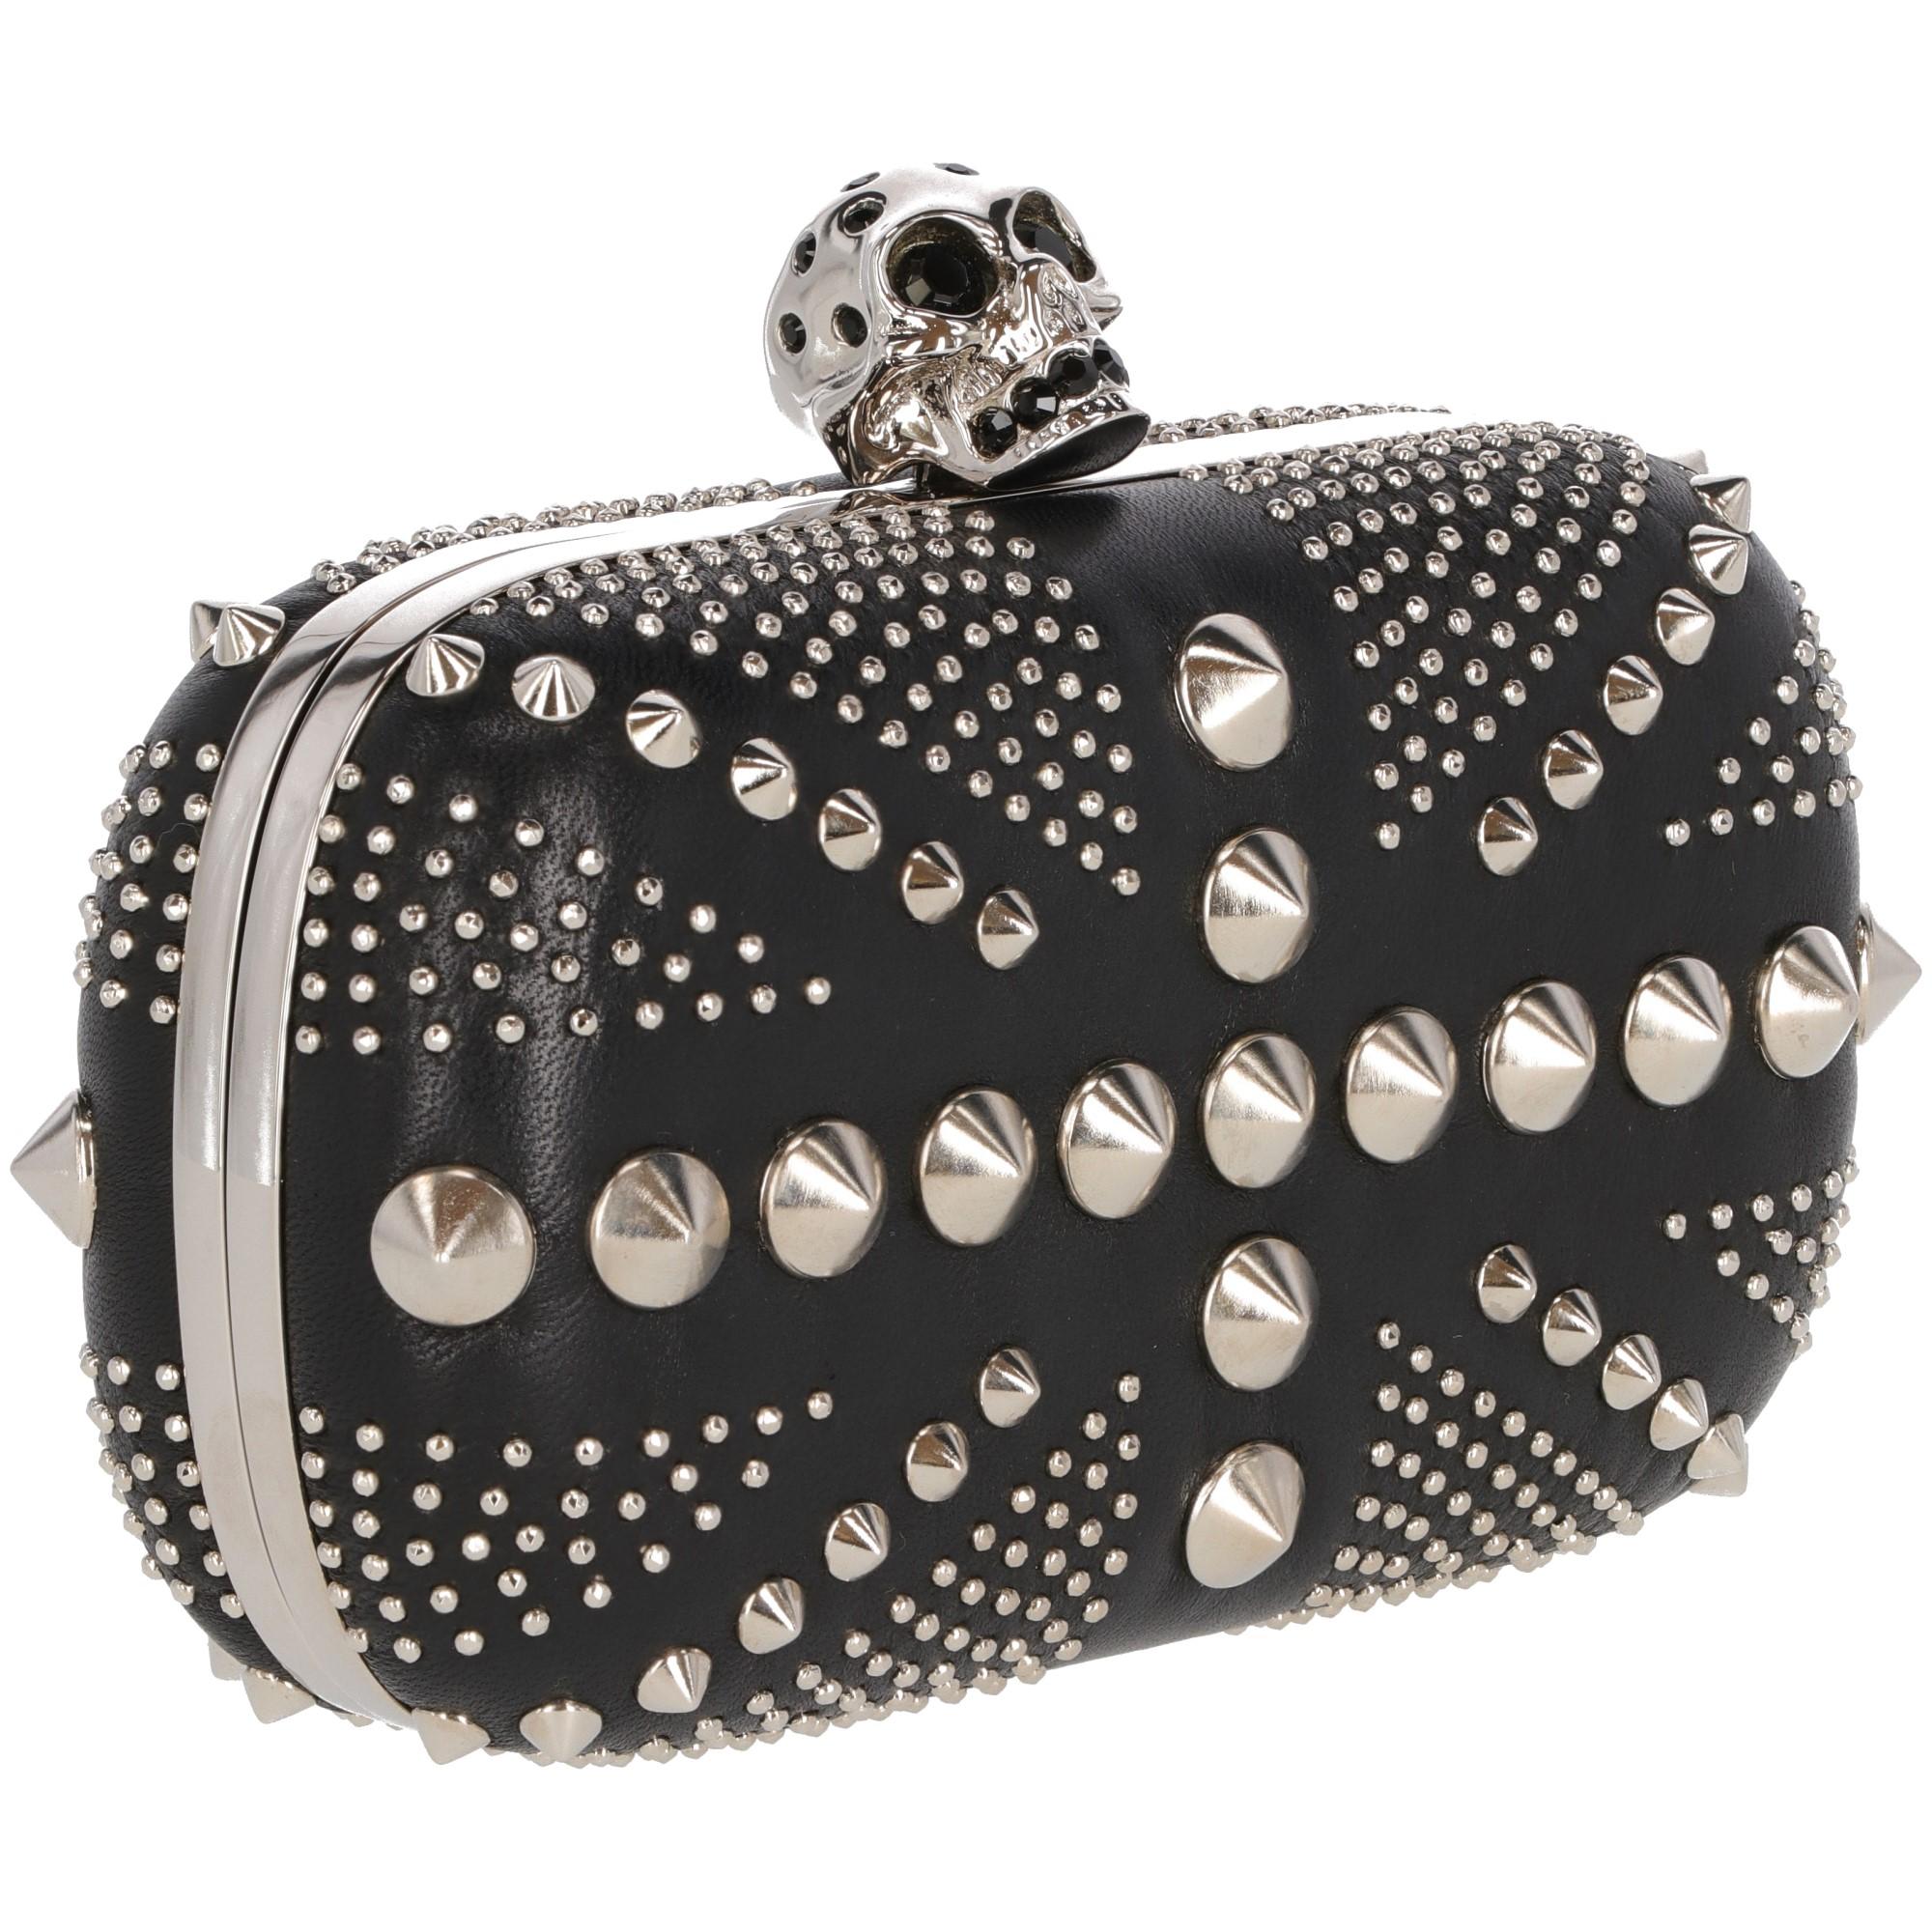 Alexander McQueen studded Union Jack black real leather box clutch with iconic silver-tone metal skull clasp lock with carved logo, embellished with black crystals. Lined in black real leather. 
Embossed code inside: 236715 000926. The clutch comes